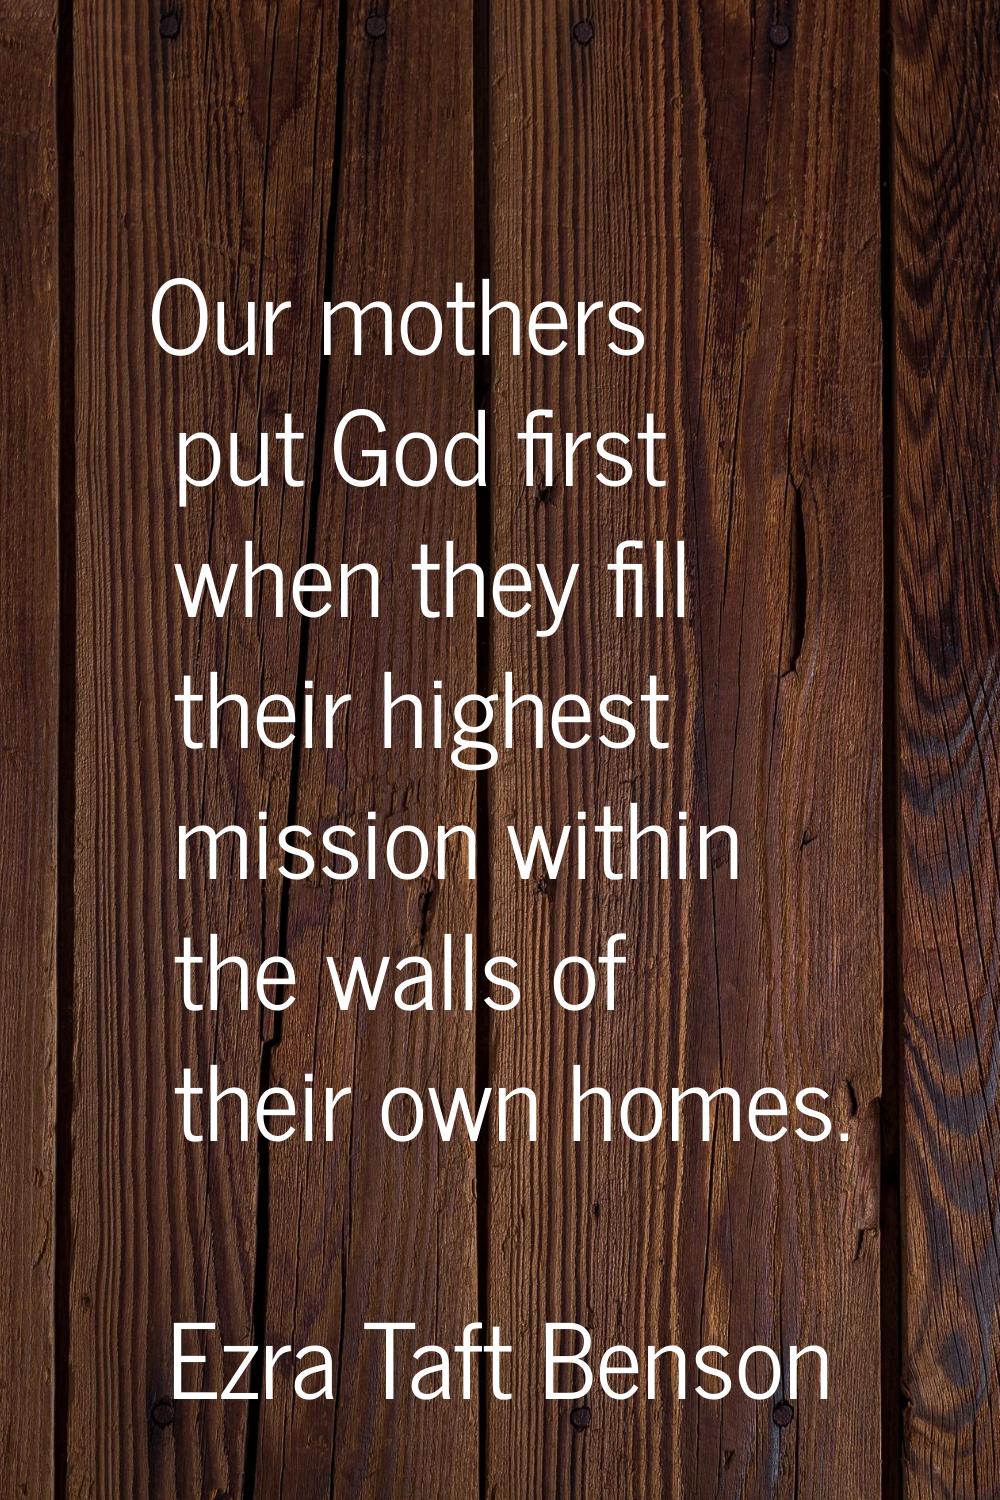 Our mothers put God first when they fill their highest mission within the walls of their own homes.